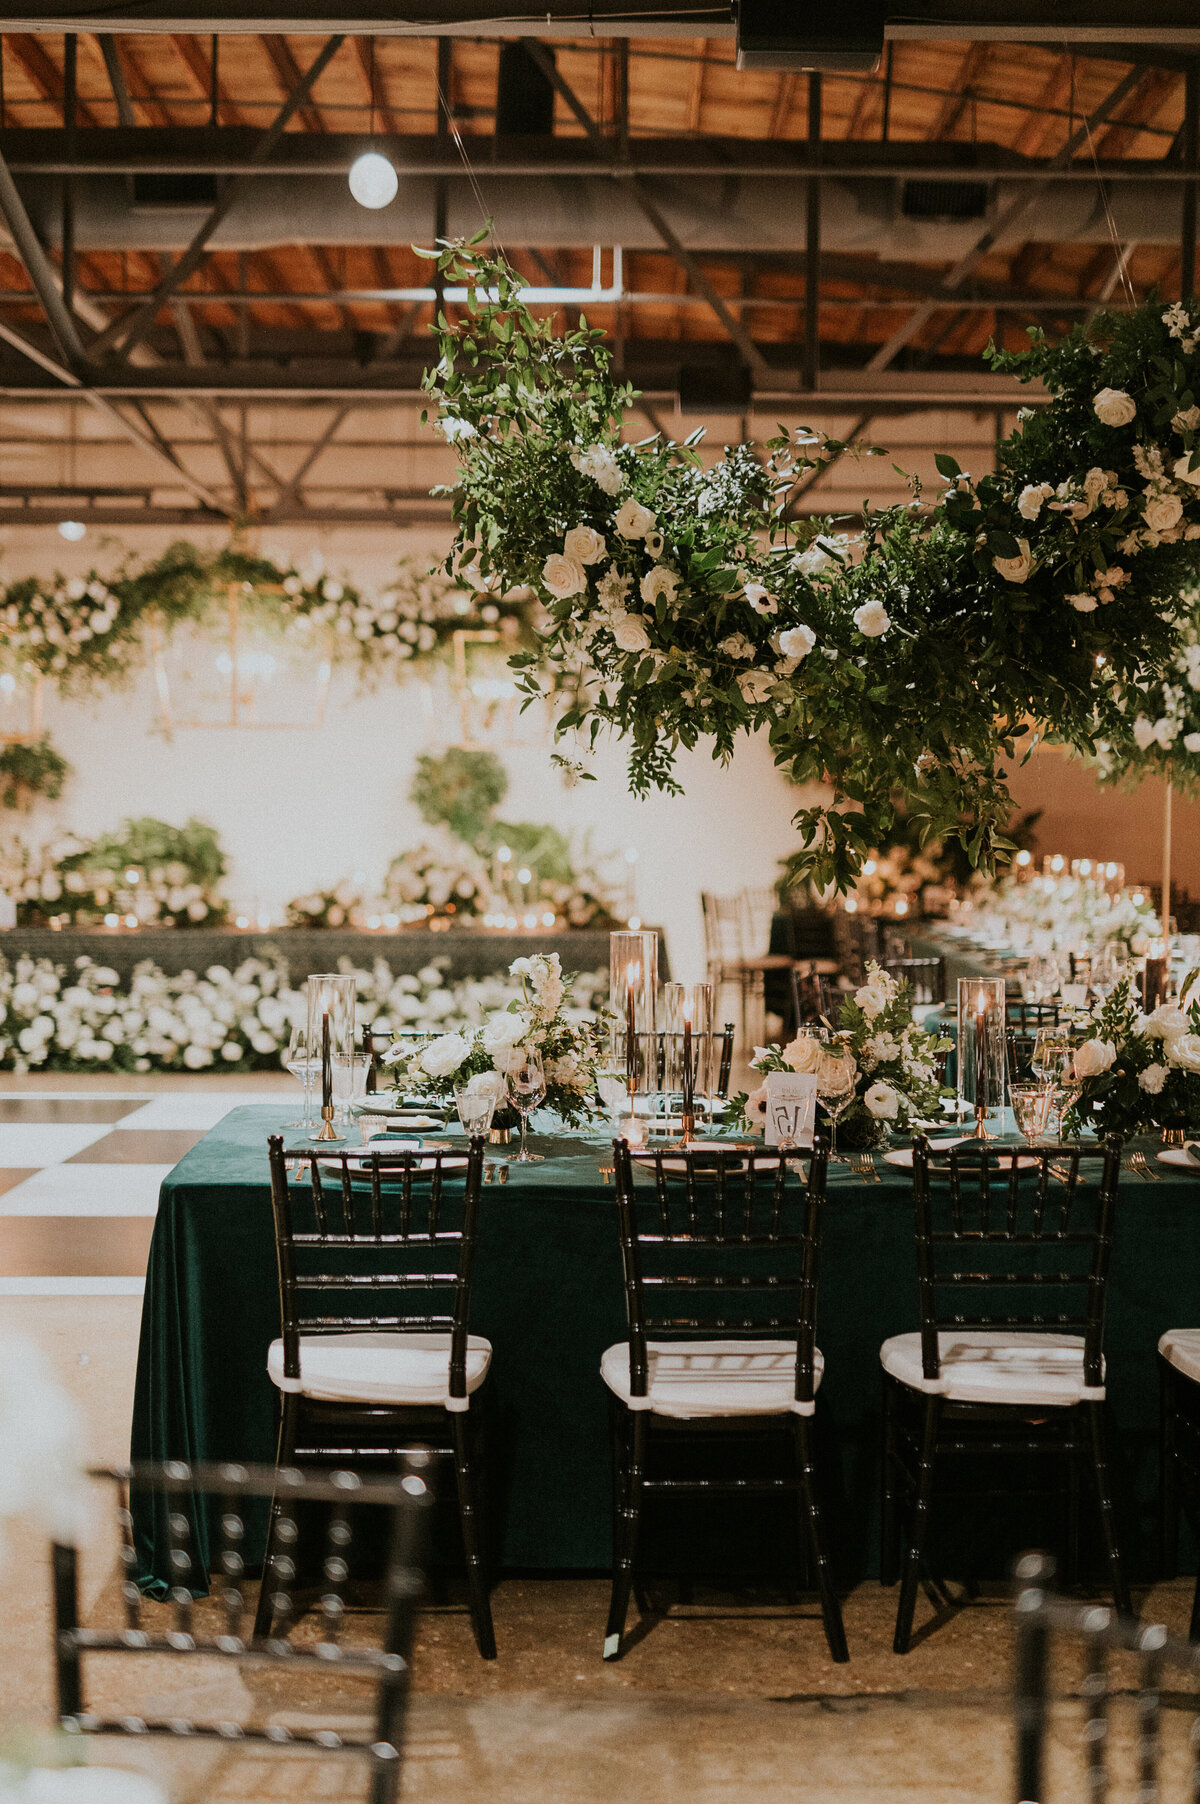 Eye-catching hanging floral installation decorate this winter wedding reception tables with floral hues of white, cream, black, and emerald composed of petal heavy roses, anemones, delphinium, carnations, and natural greenery. Design by Rosemary and Finch in Nashville, TN.